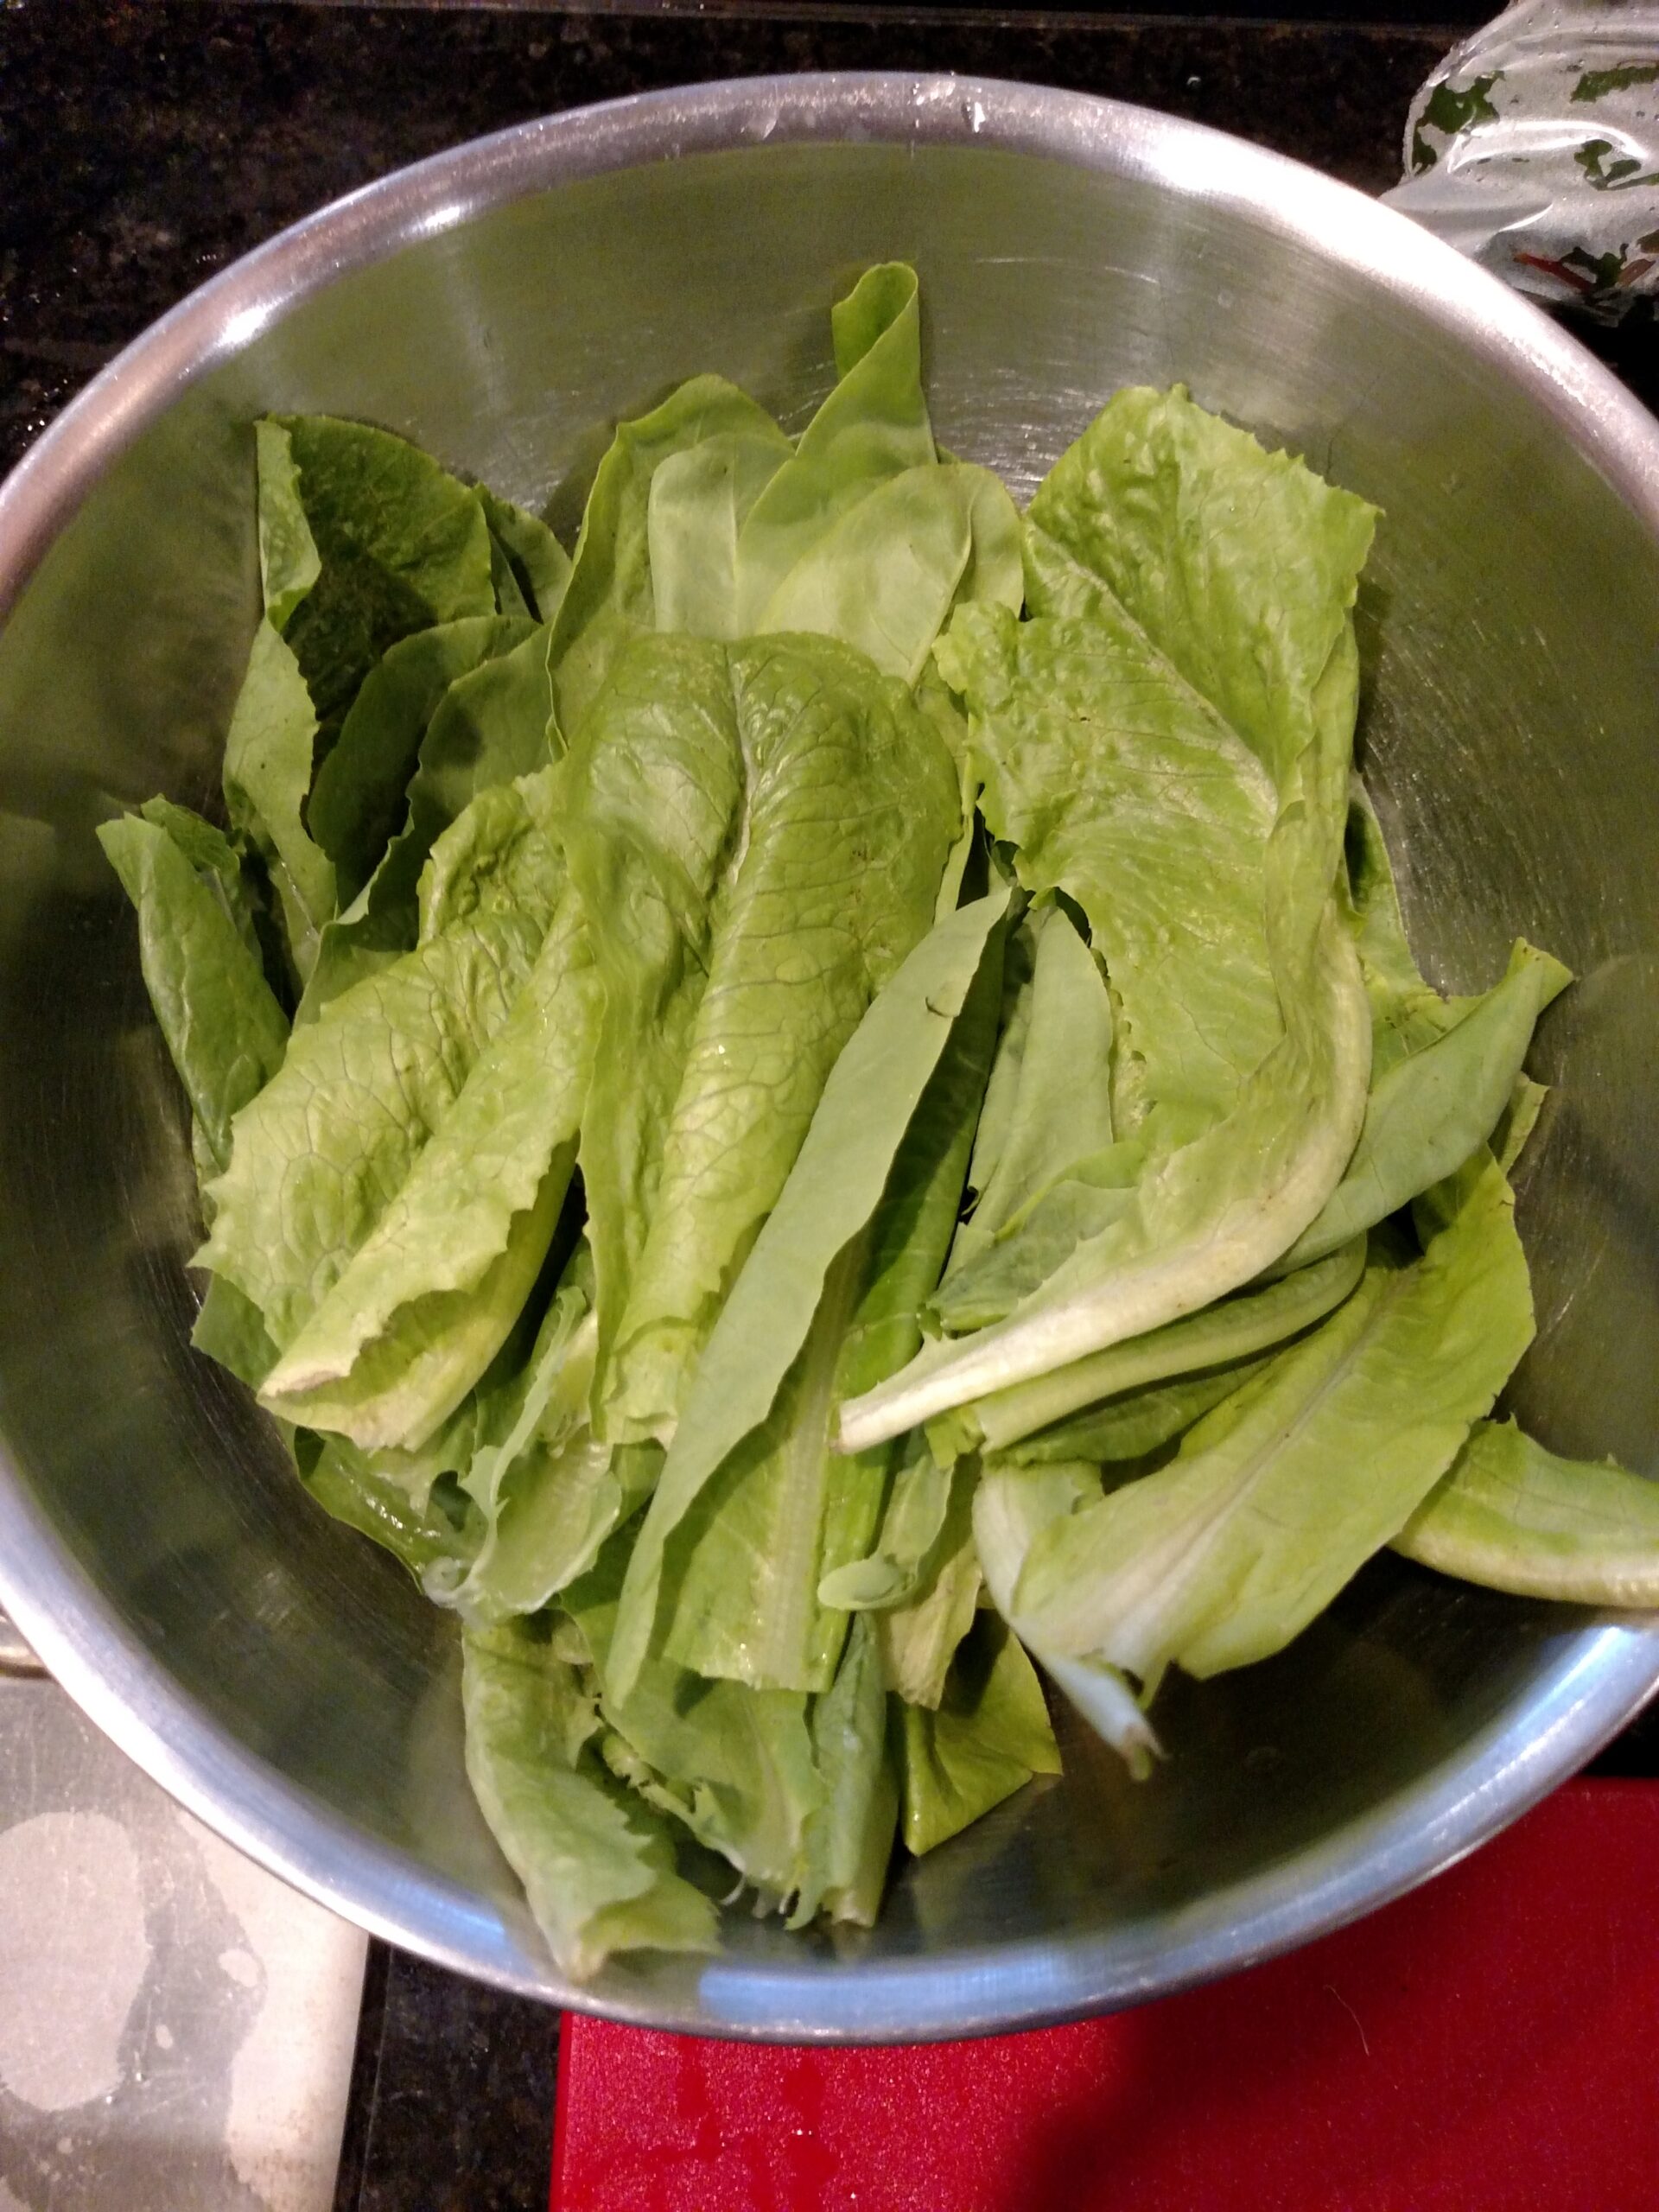 stainless steel bowl with fresh, garden lettuce in it.